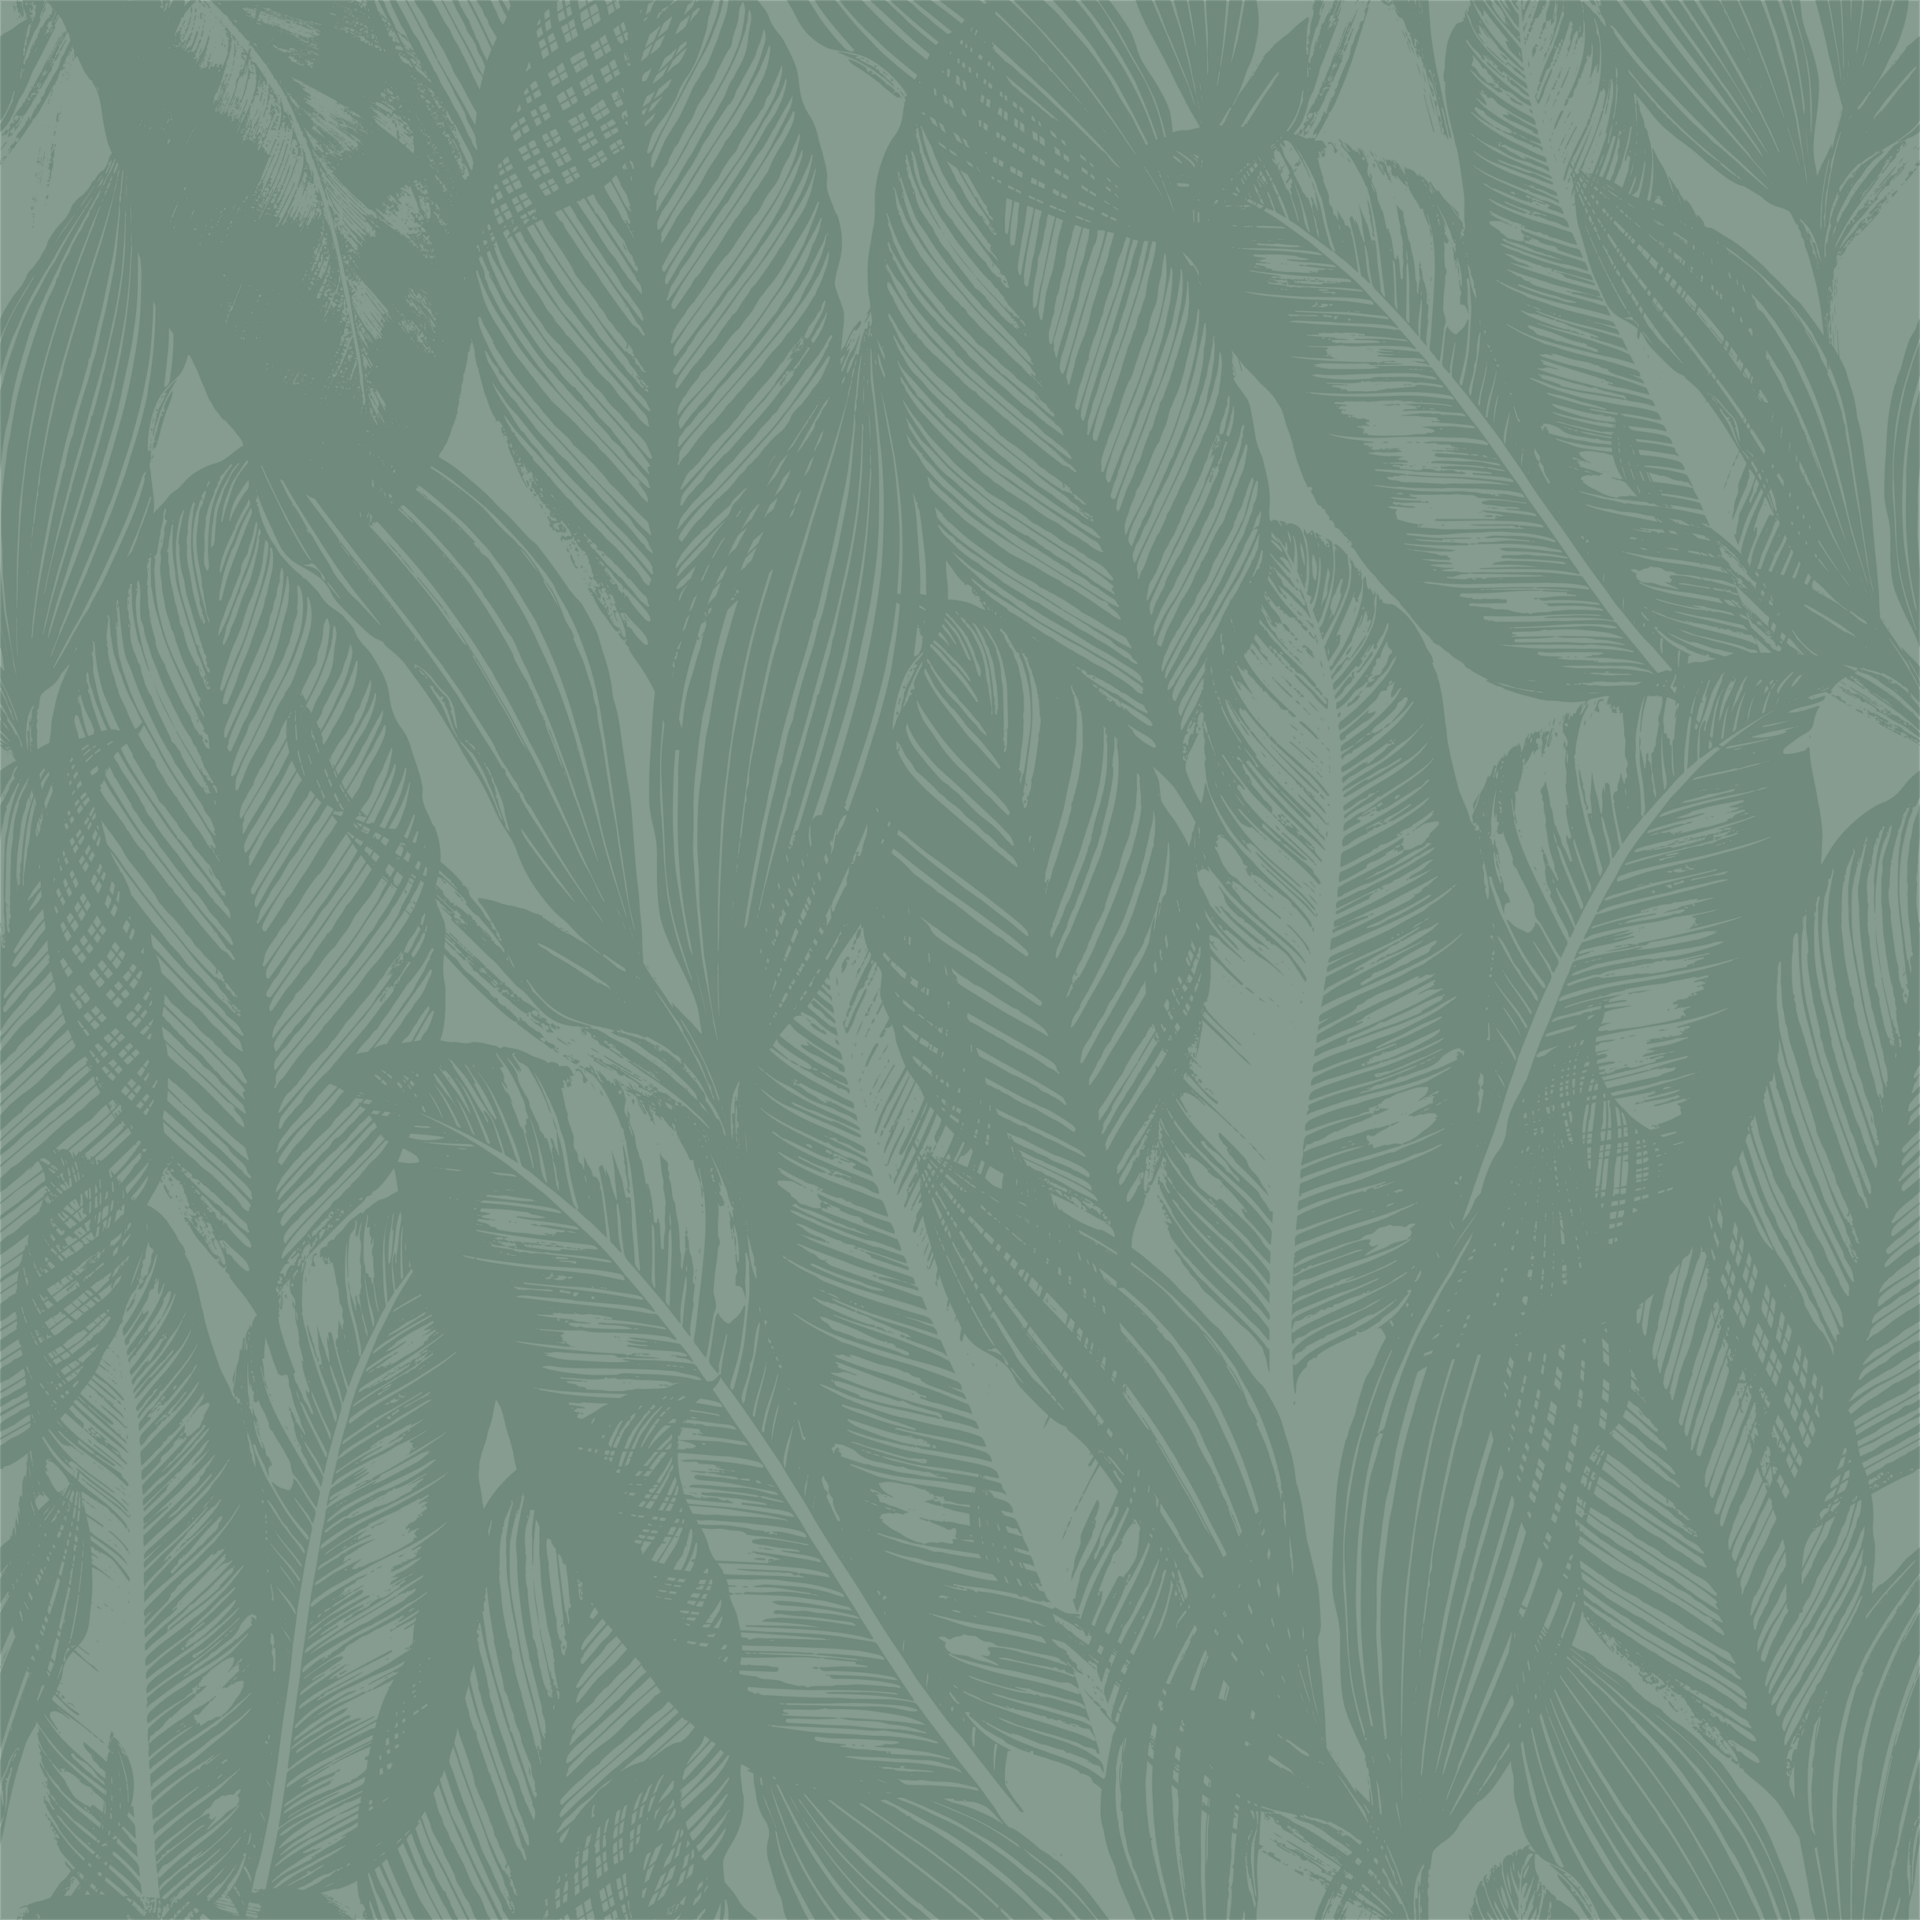 The image features an intricate pattern of hand-drawn, textured leaves in varying shades of green, creating a dense and lush tropical foliage backdrop.